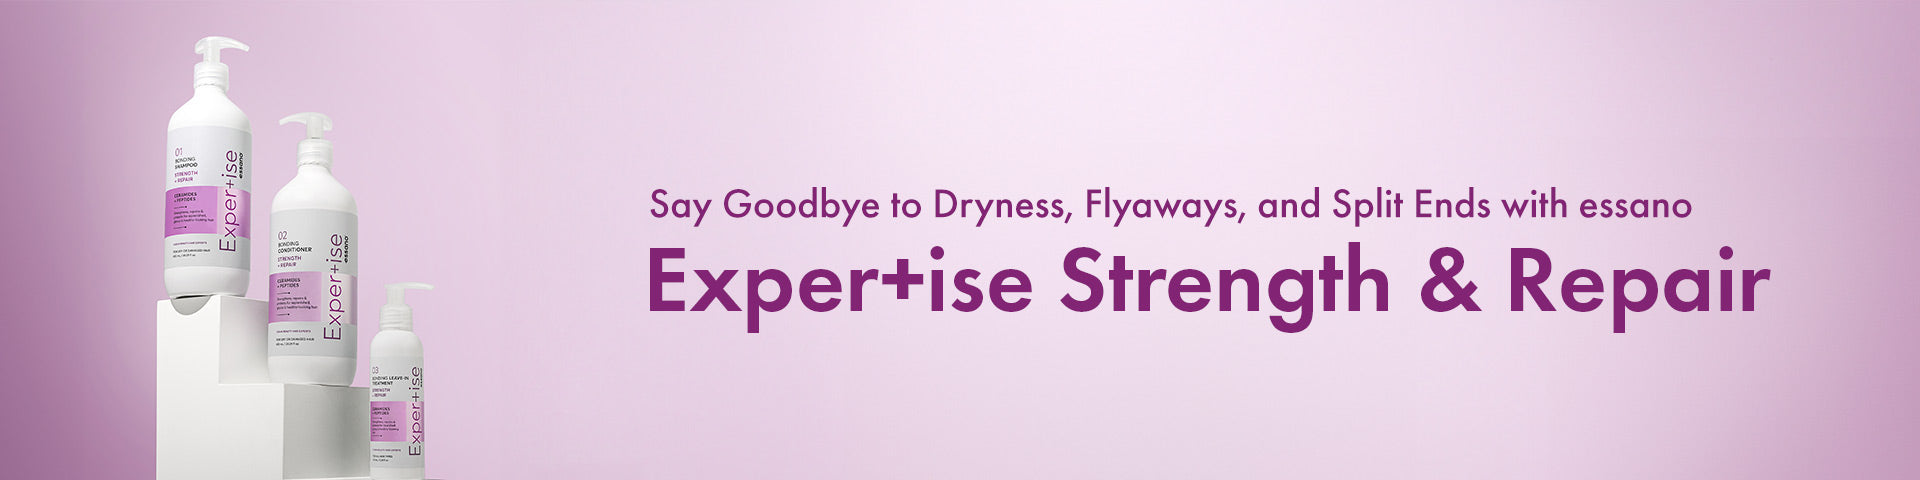 Tame Your Mane: Say Goodbye to Dryness, Flyaways, and Split Ends with essano Exper+ise Strength & Repair